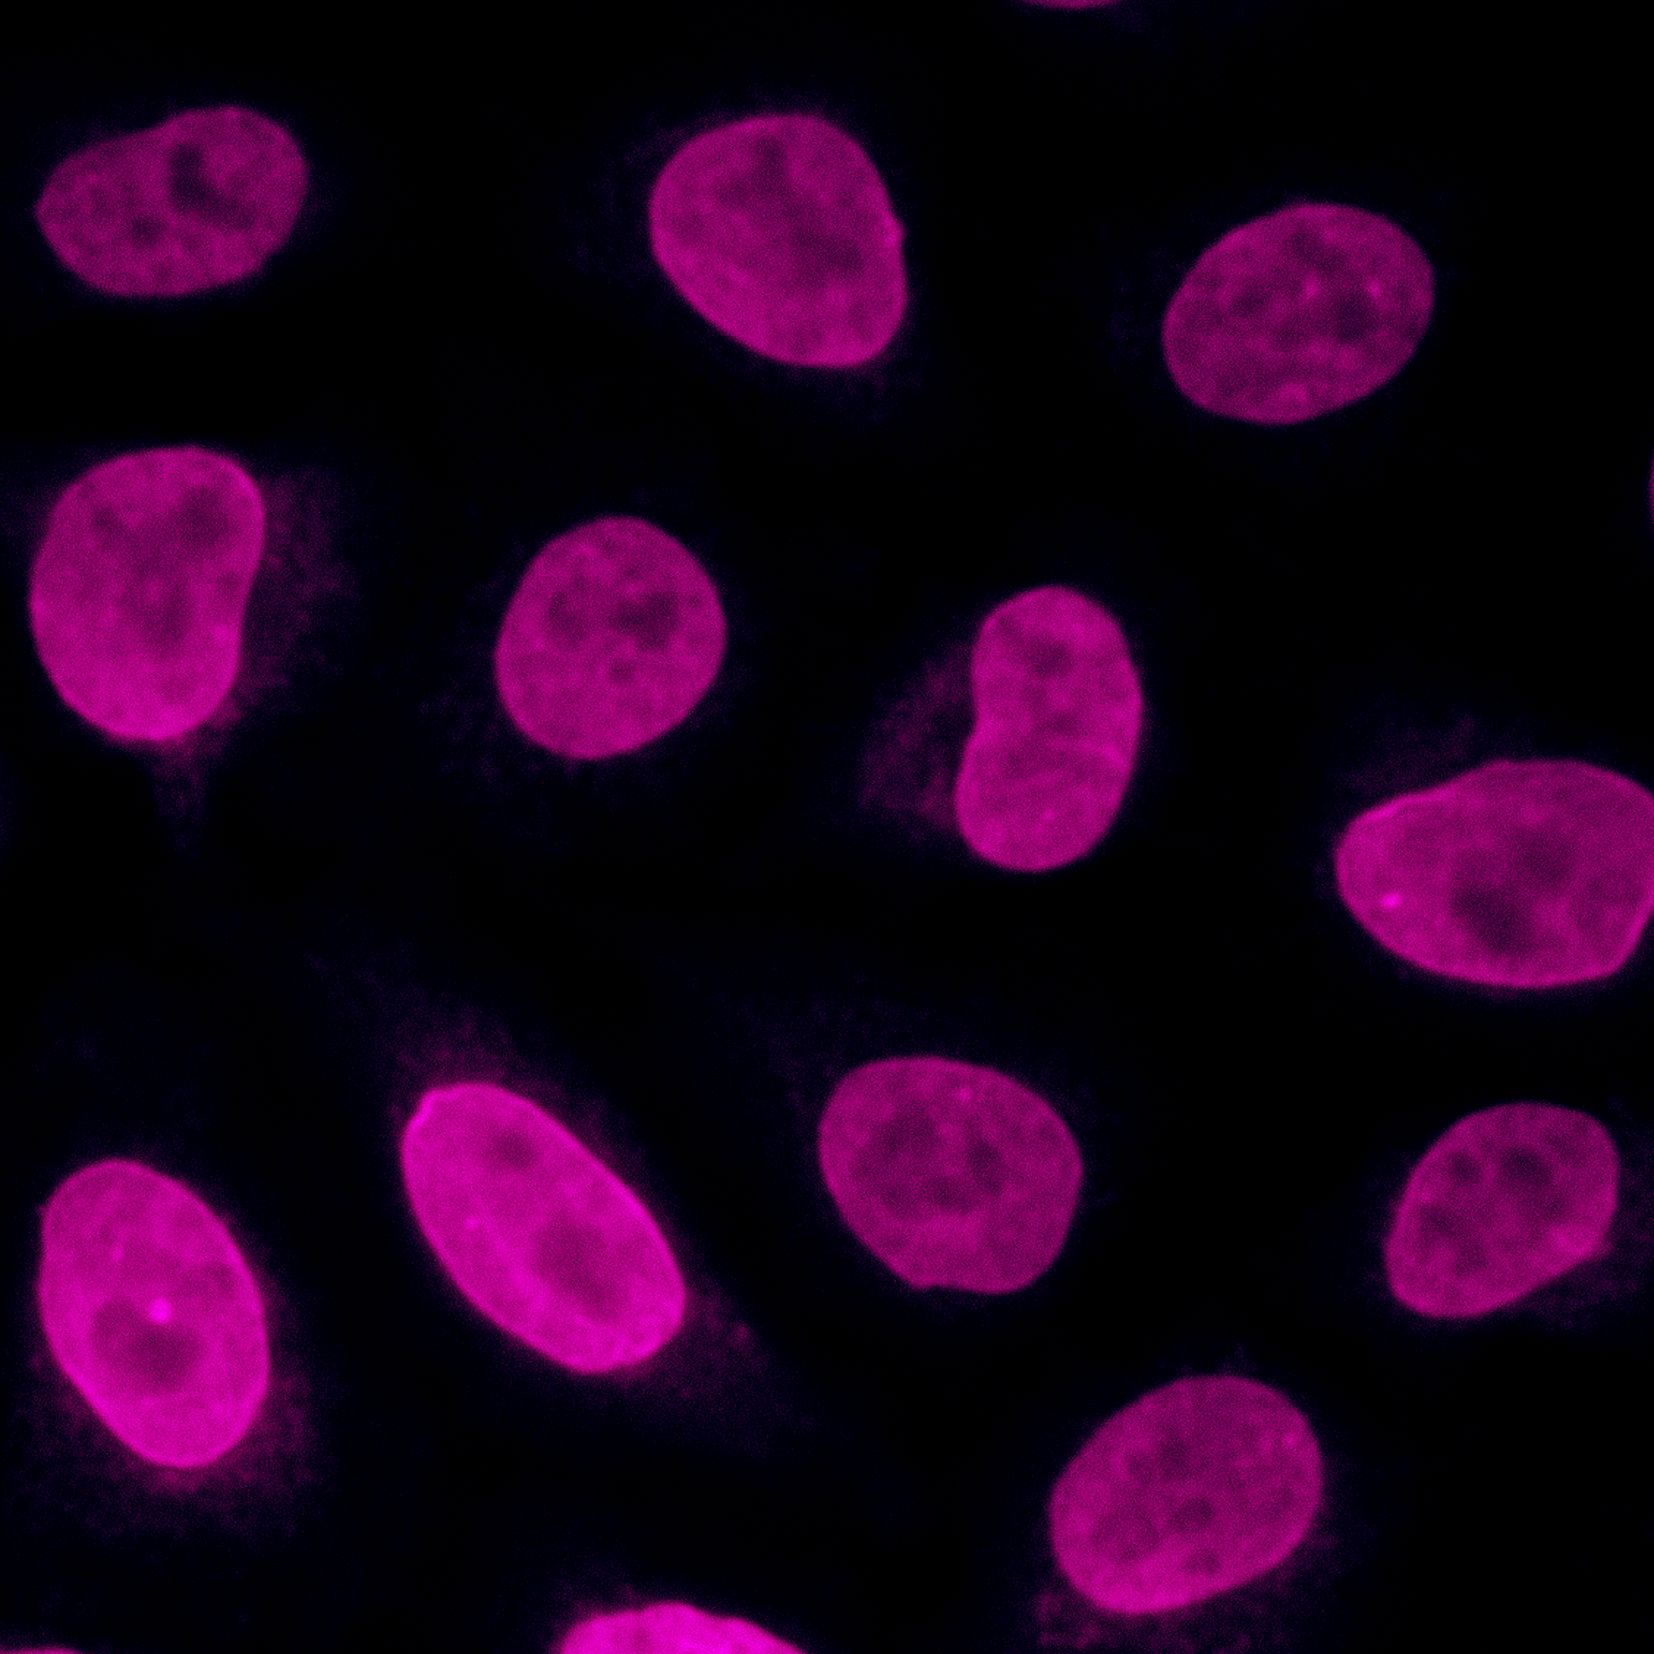 Immunofluorescence analysis of Hela cells stained with mouse IgG2a anti-Lamin B2 antibody (66240-1-Ig) and Nano-Secondary® alpaca anti-mouse IgG2a, recombinant VHH, CoraLite® Plus 750 (magenta). Nuclei were stained with DAPI (blue). Images were recorded at the Core Facility Bioimaging at the Biomedical Center, LMU Munich.